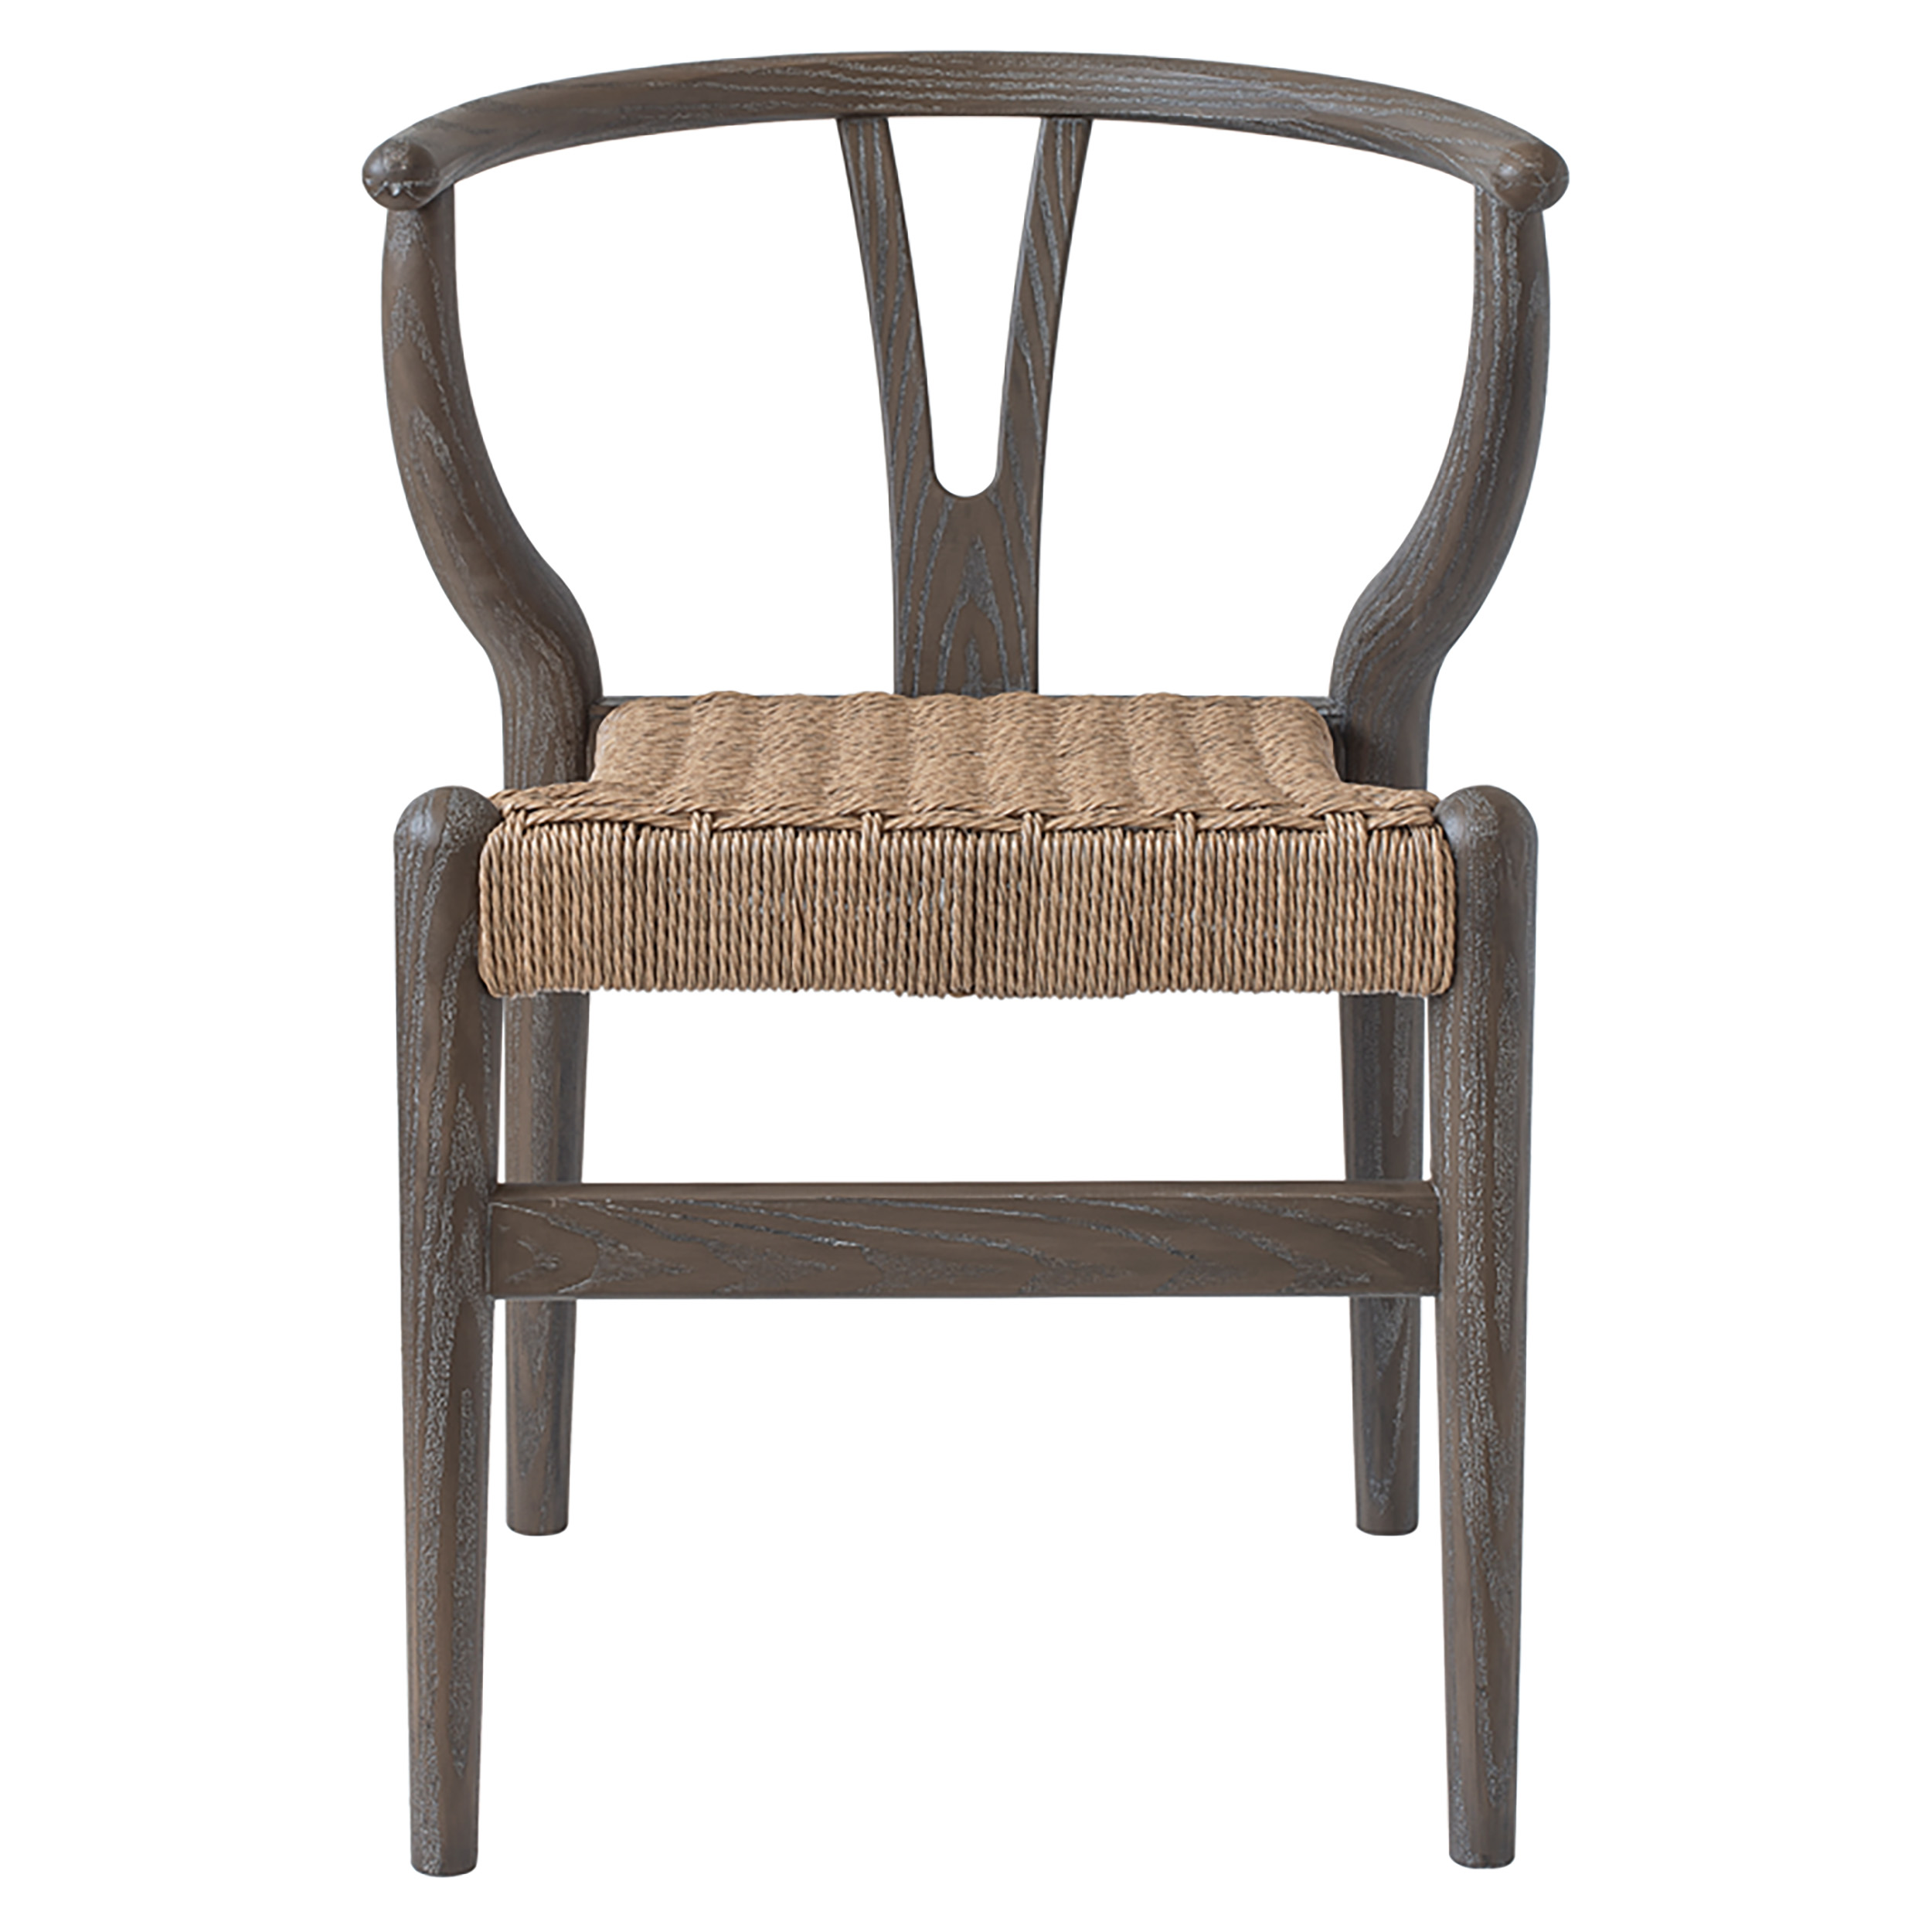 Ming-Dining Chair2